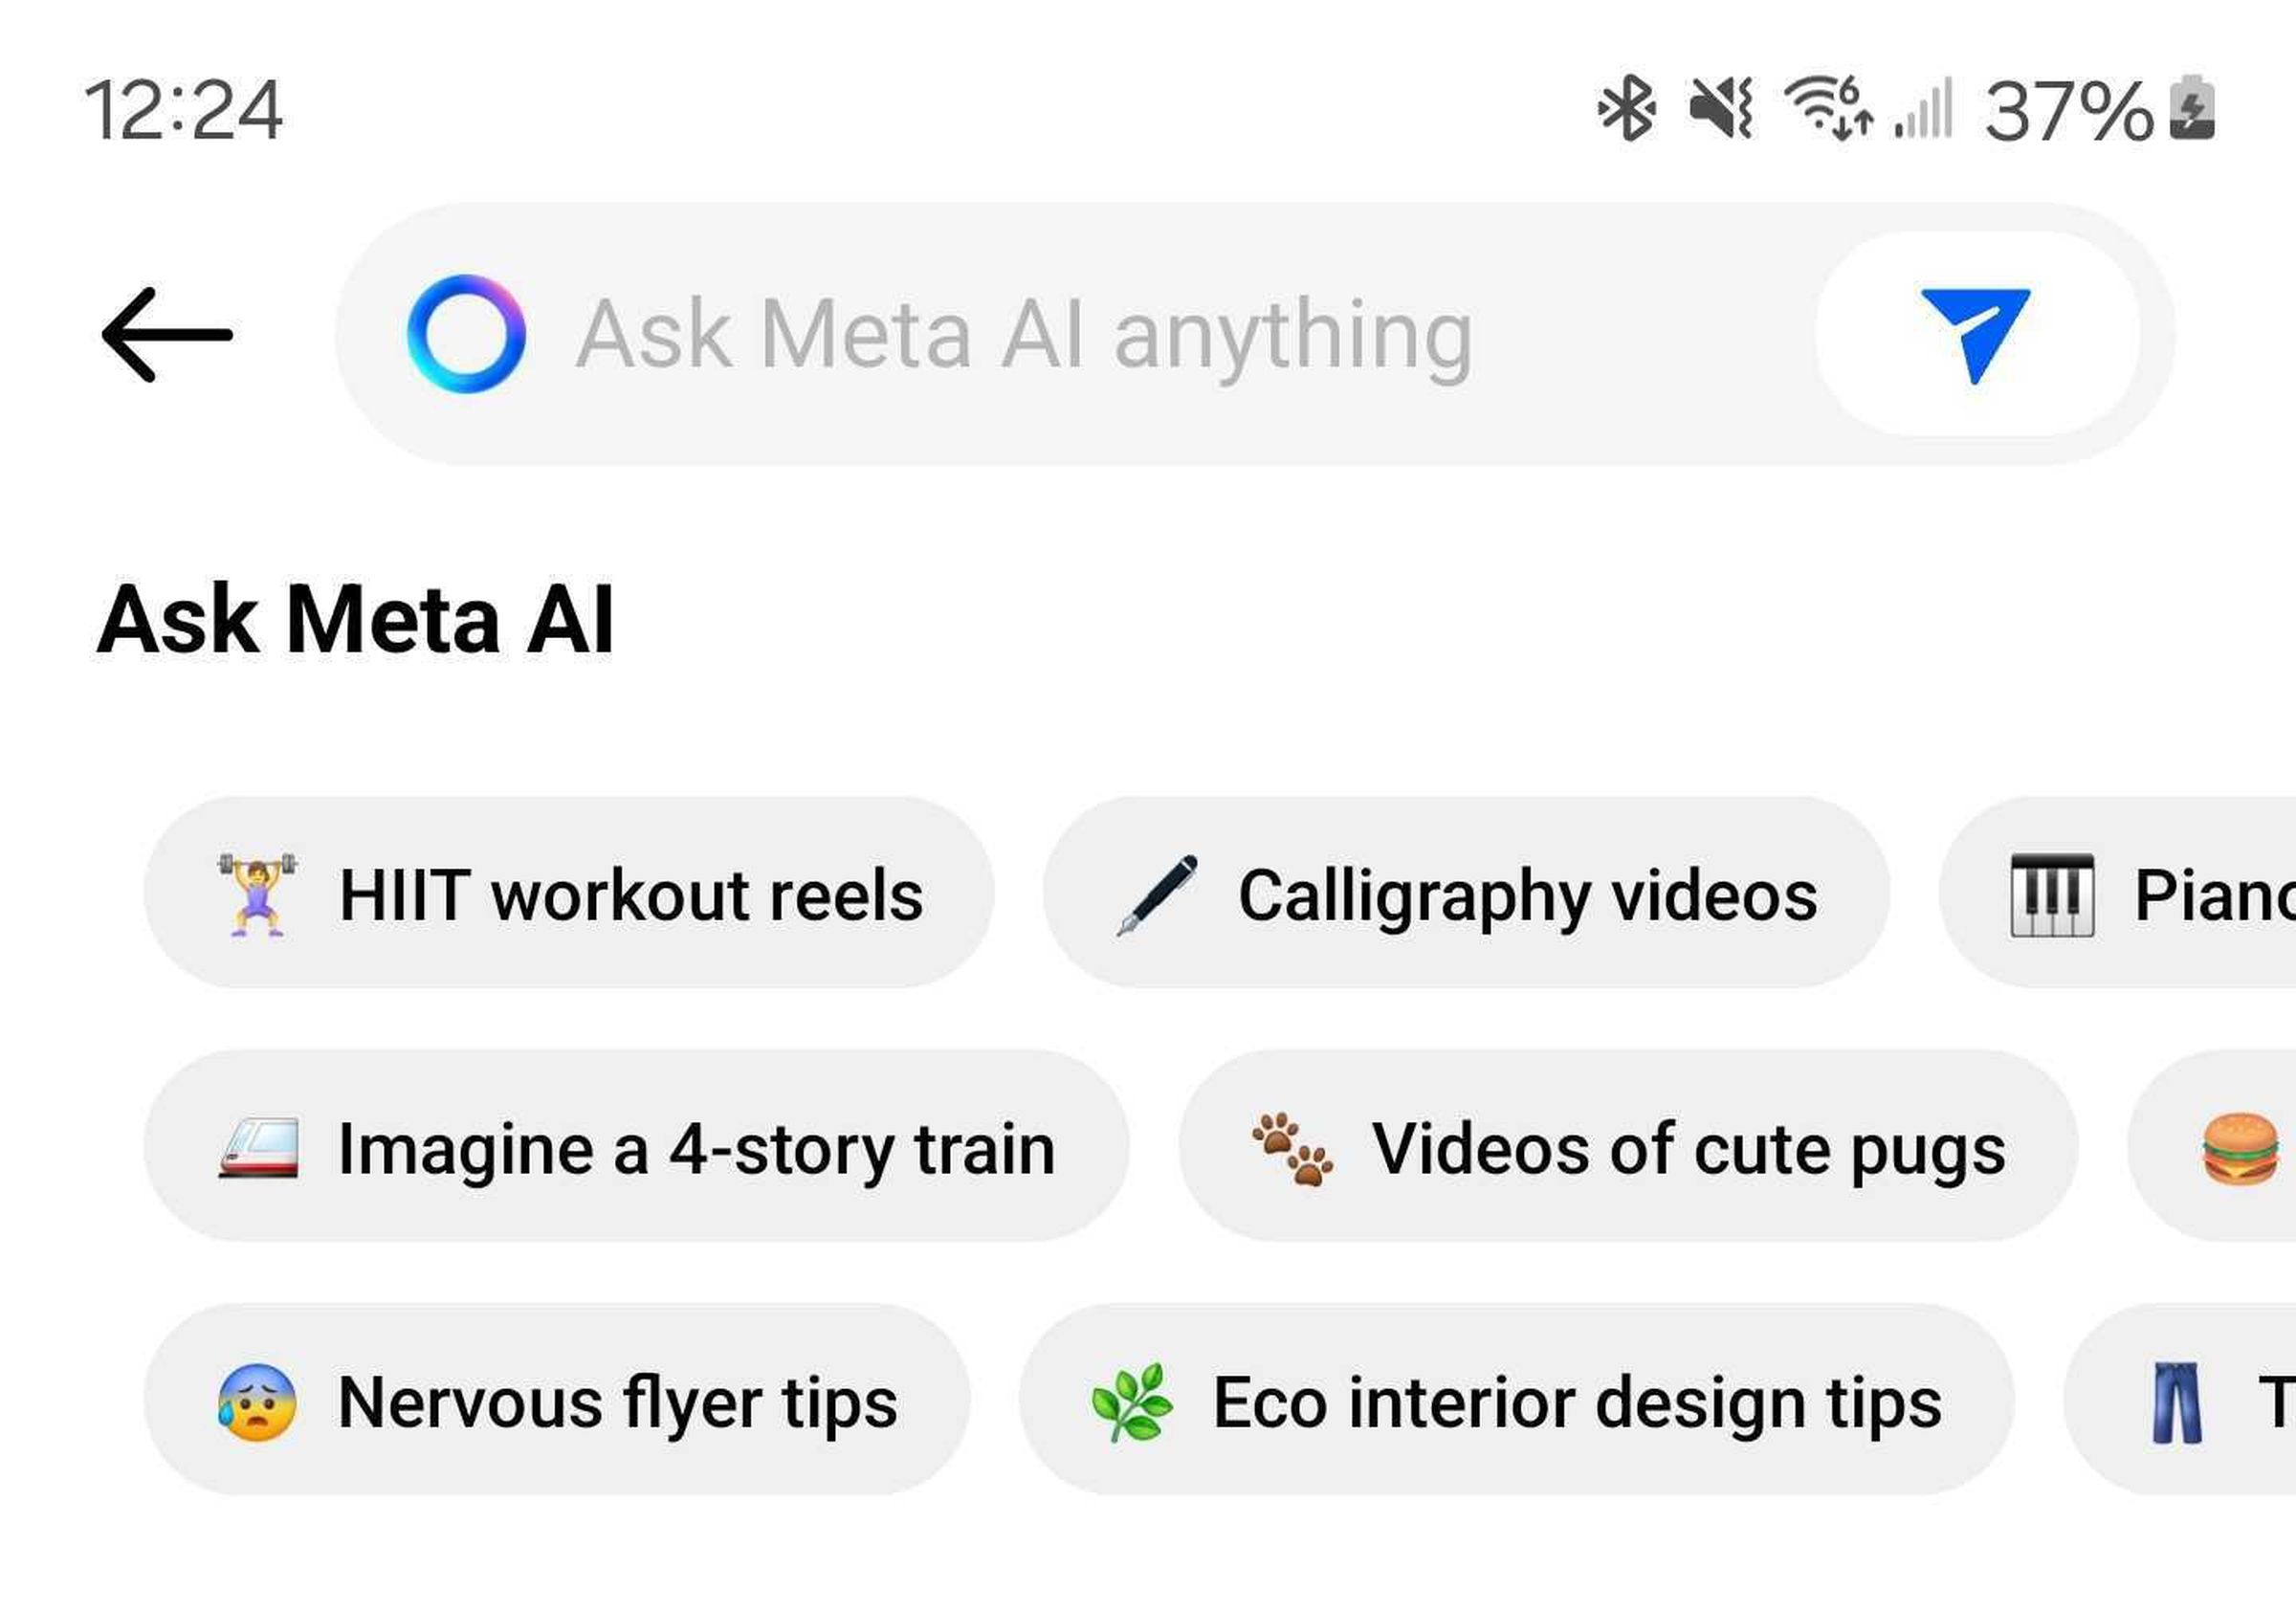 “Ask Meta AI anything,” the search box invites.